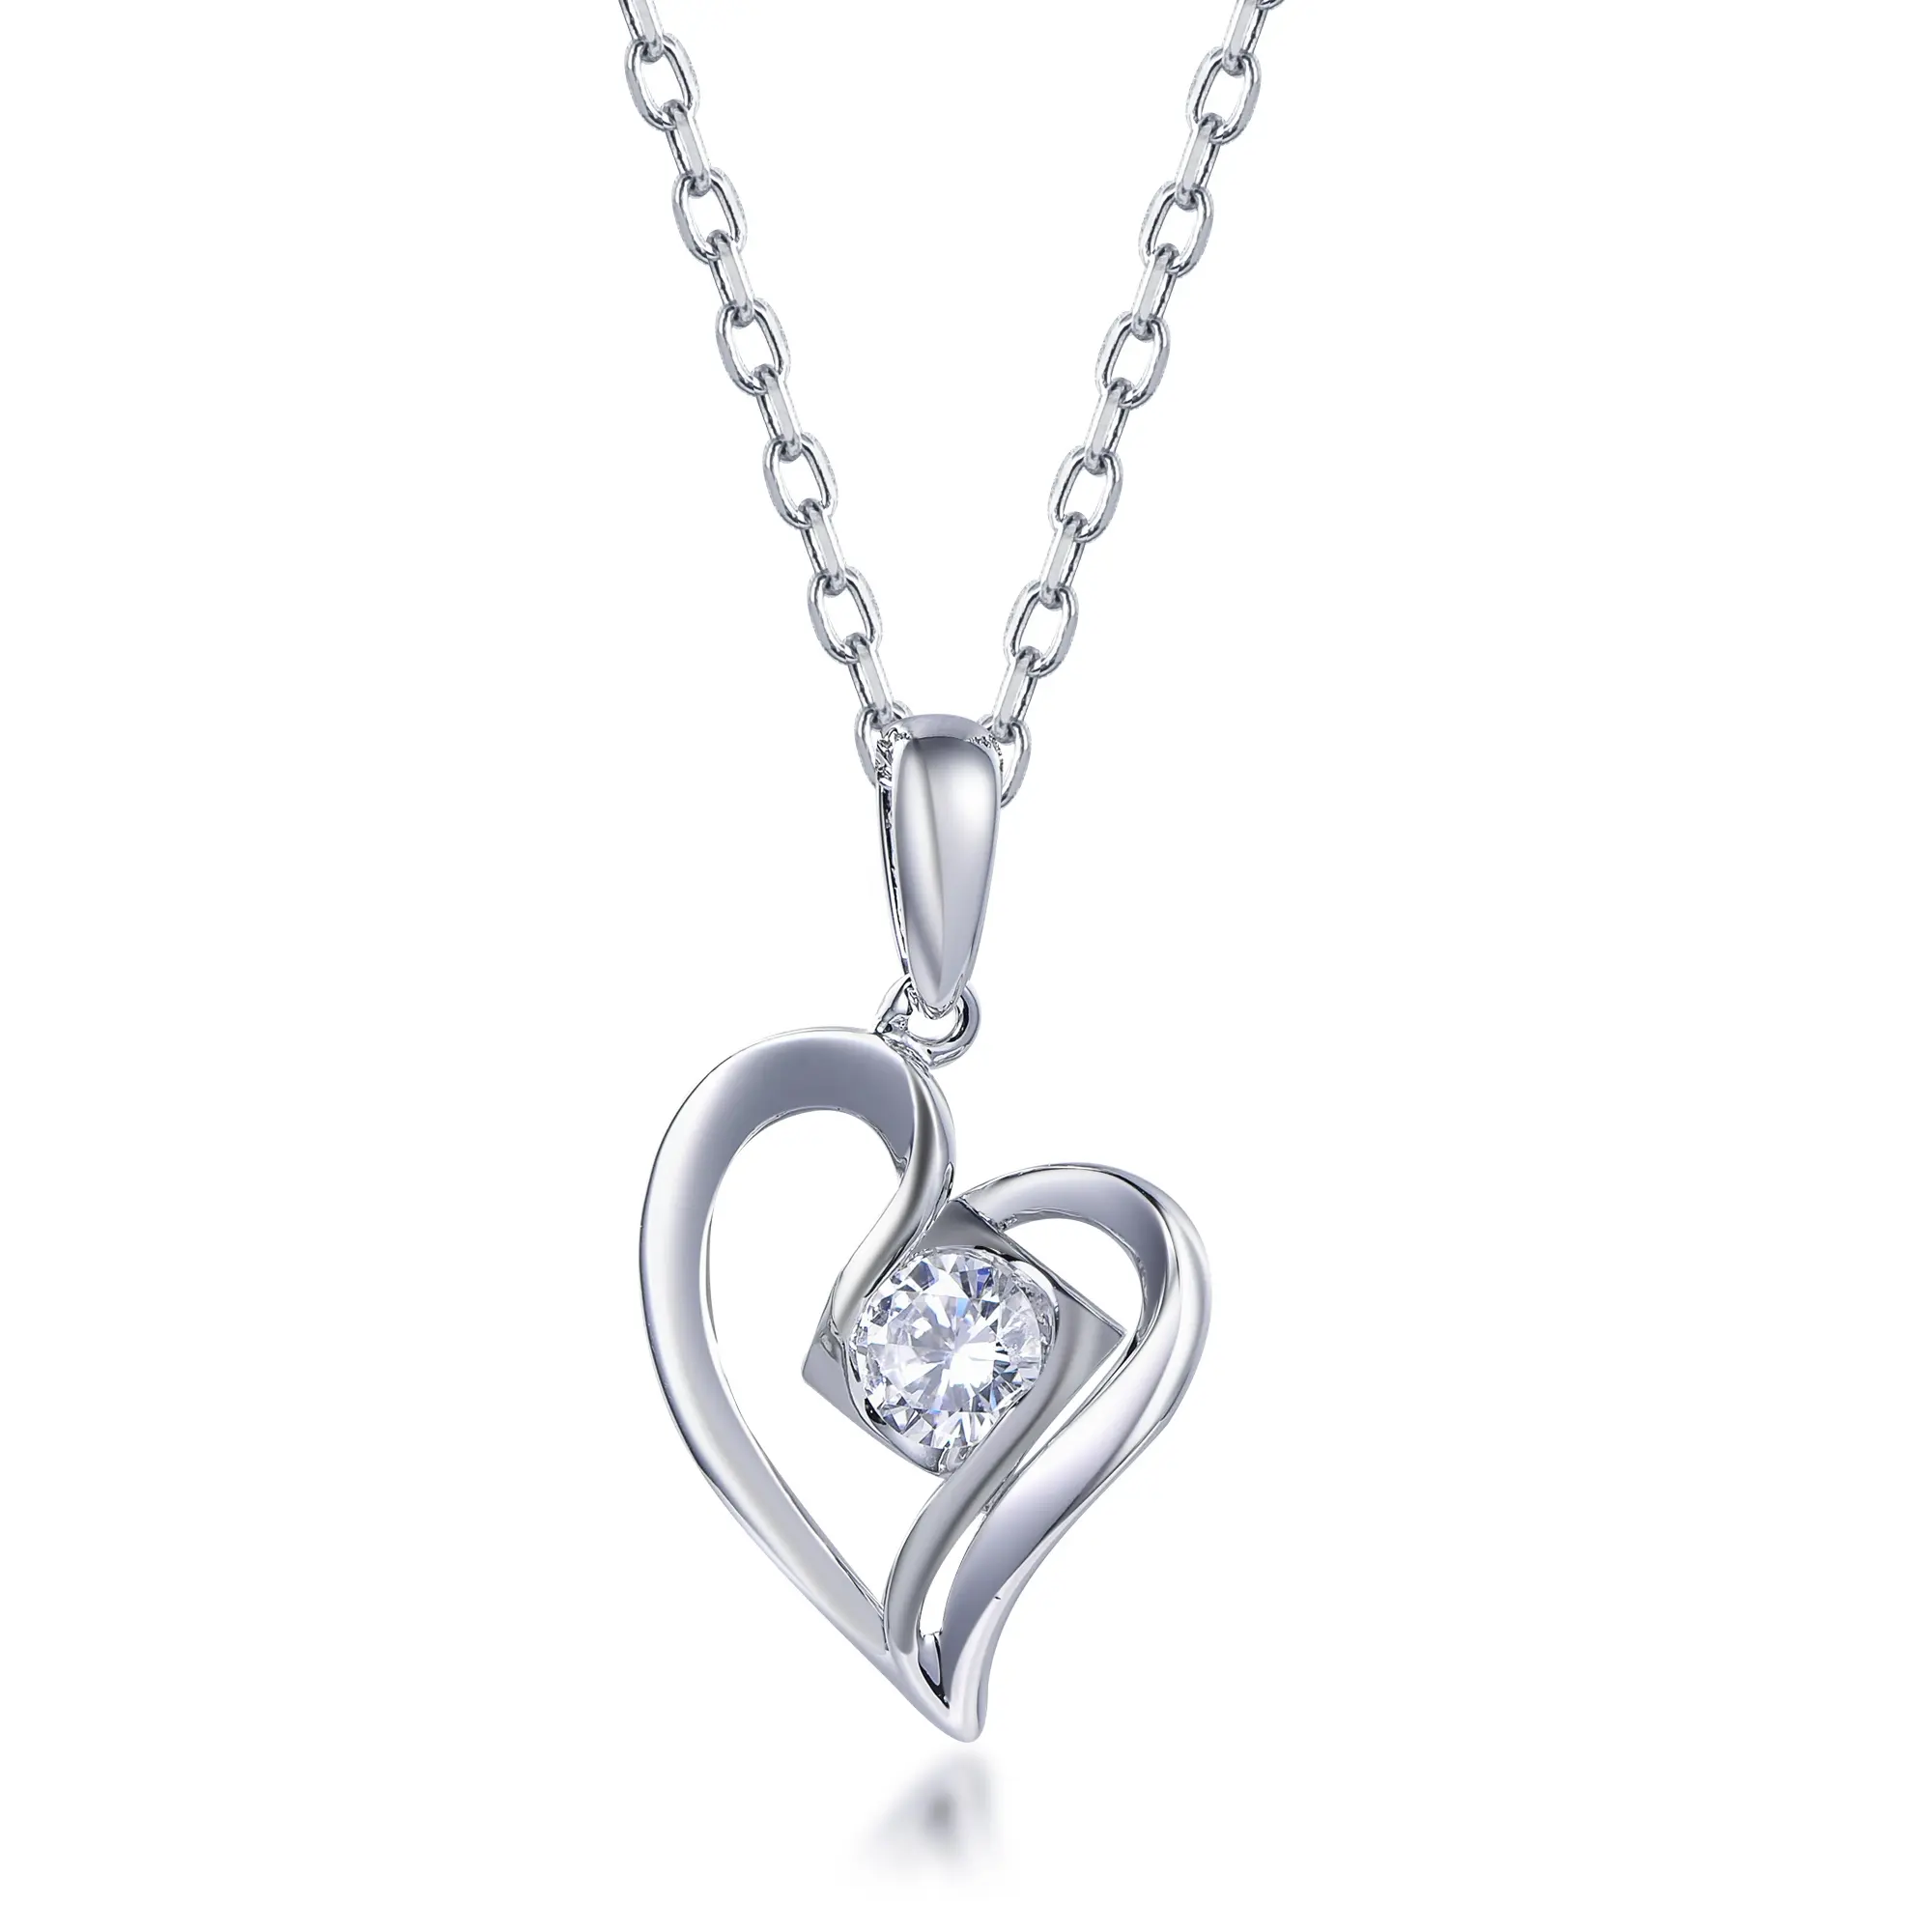 lady necklace pendant 925 sterling silver heart shaped necklace accessory Crystal heart pendant necklace